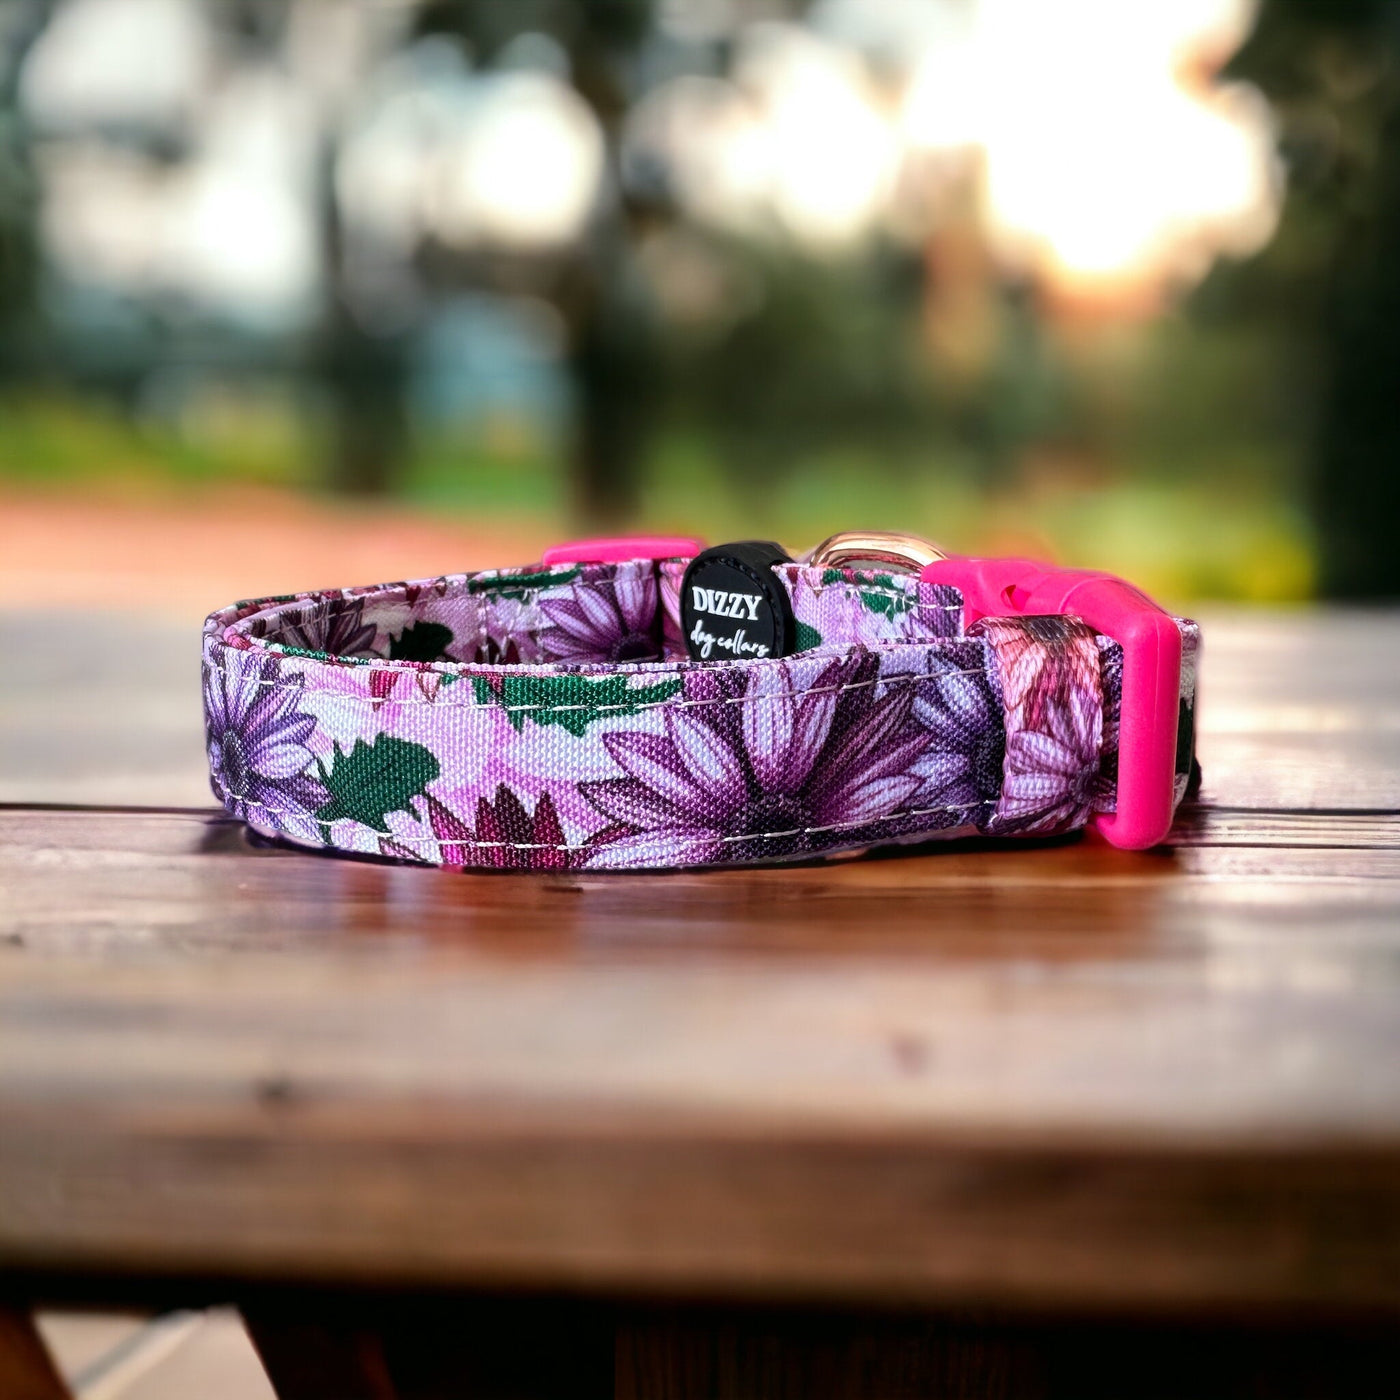 Perfect Petals Dog Collar | Canvas and Neoprene Dog Collar-Dog Collar-Dizzy Dog Collars